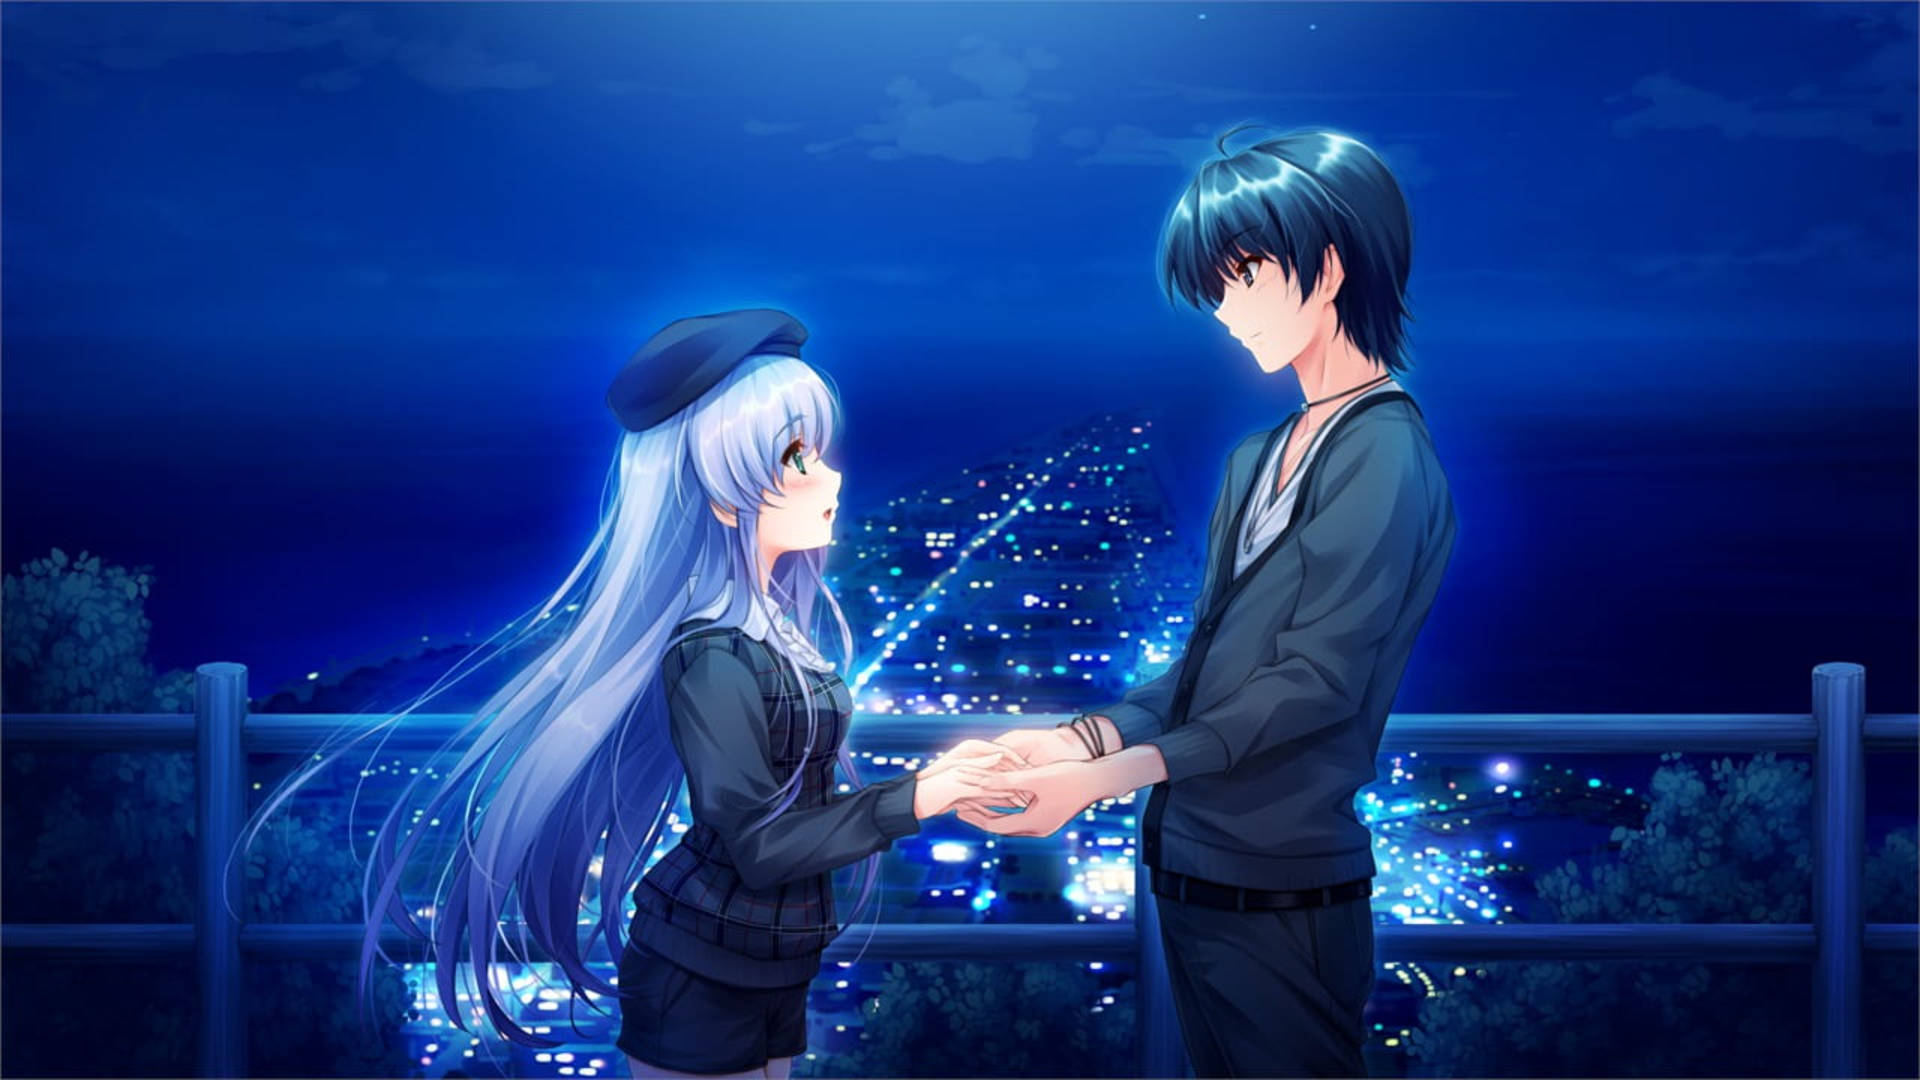 Download Blue Cute Anime Couple Wallpaper | Wallpapers.com